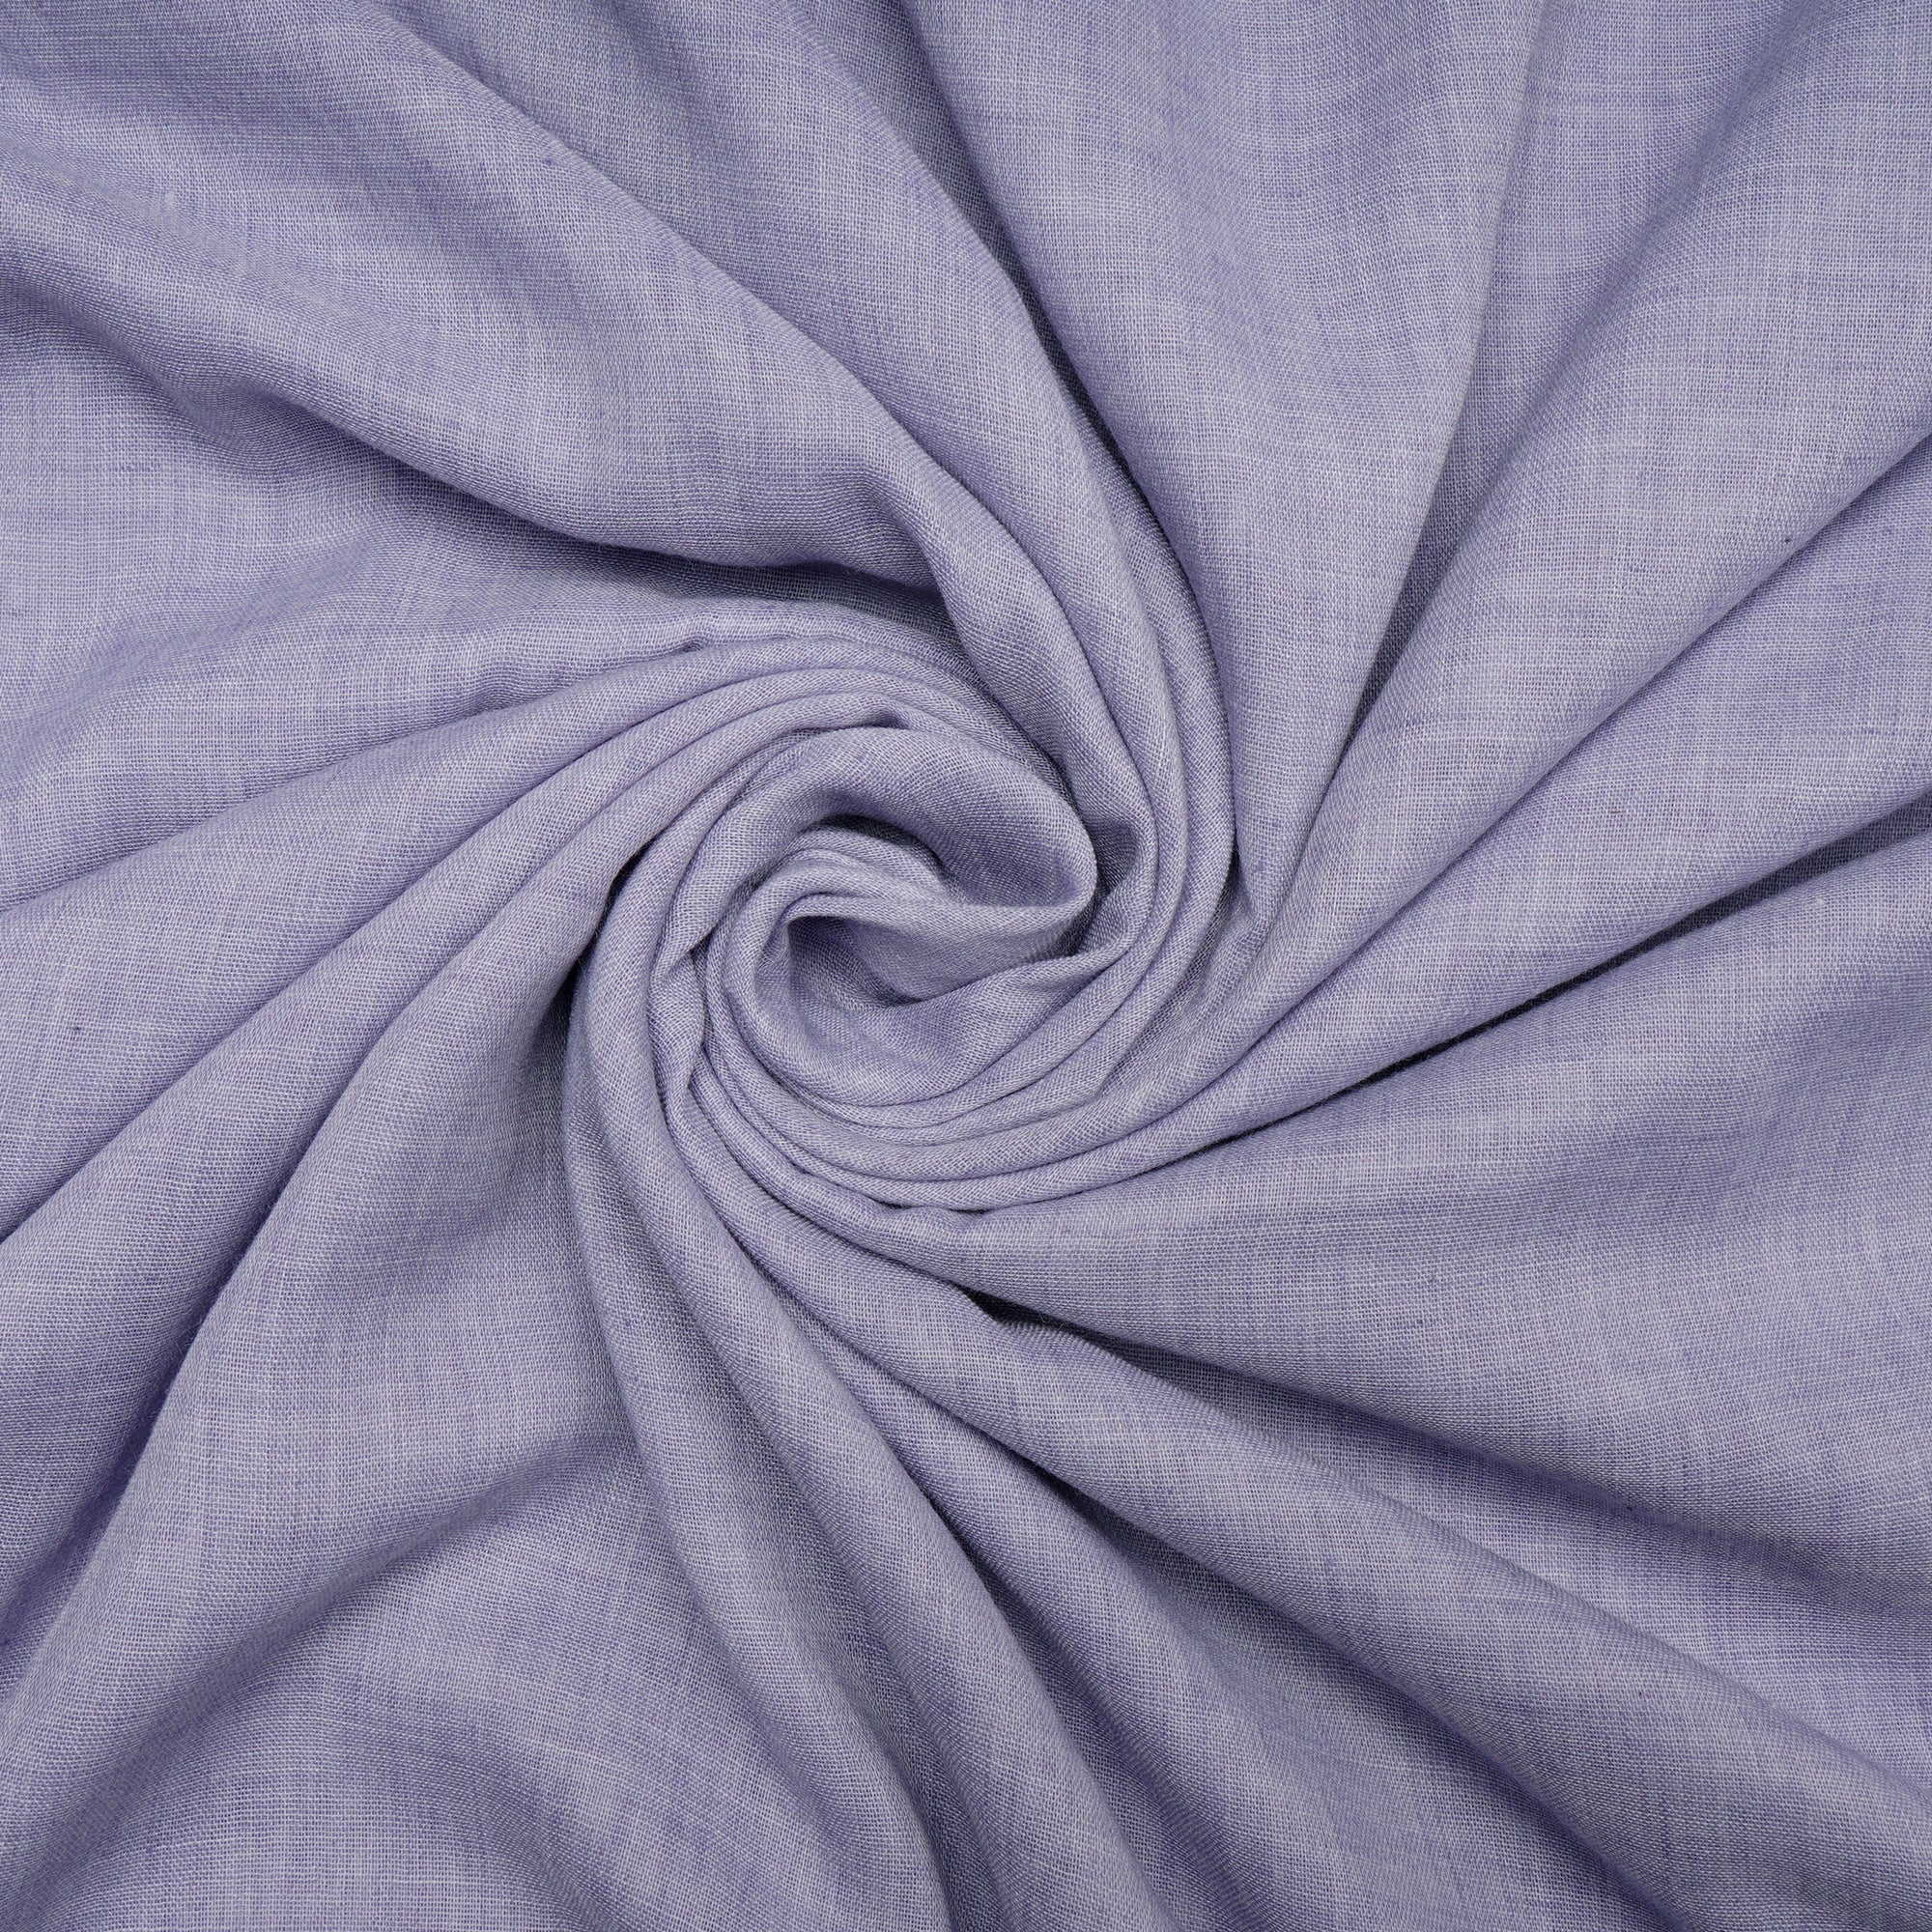 Light Lavender Cheese Cotton Chambray Fabric